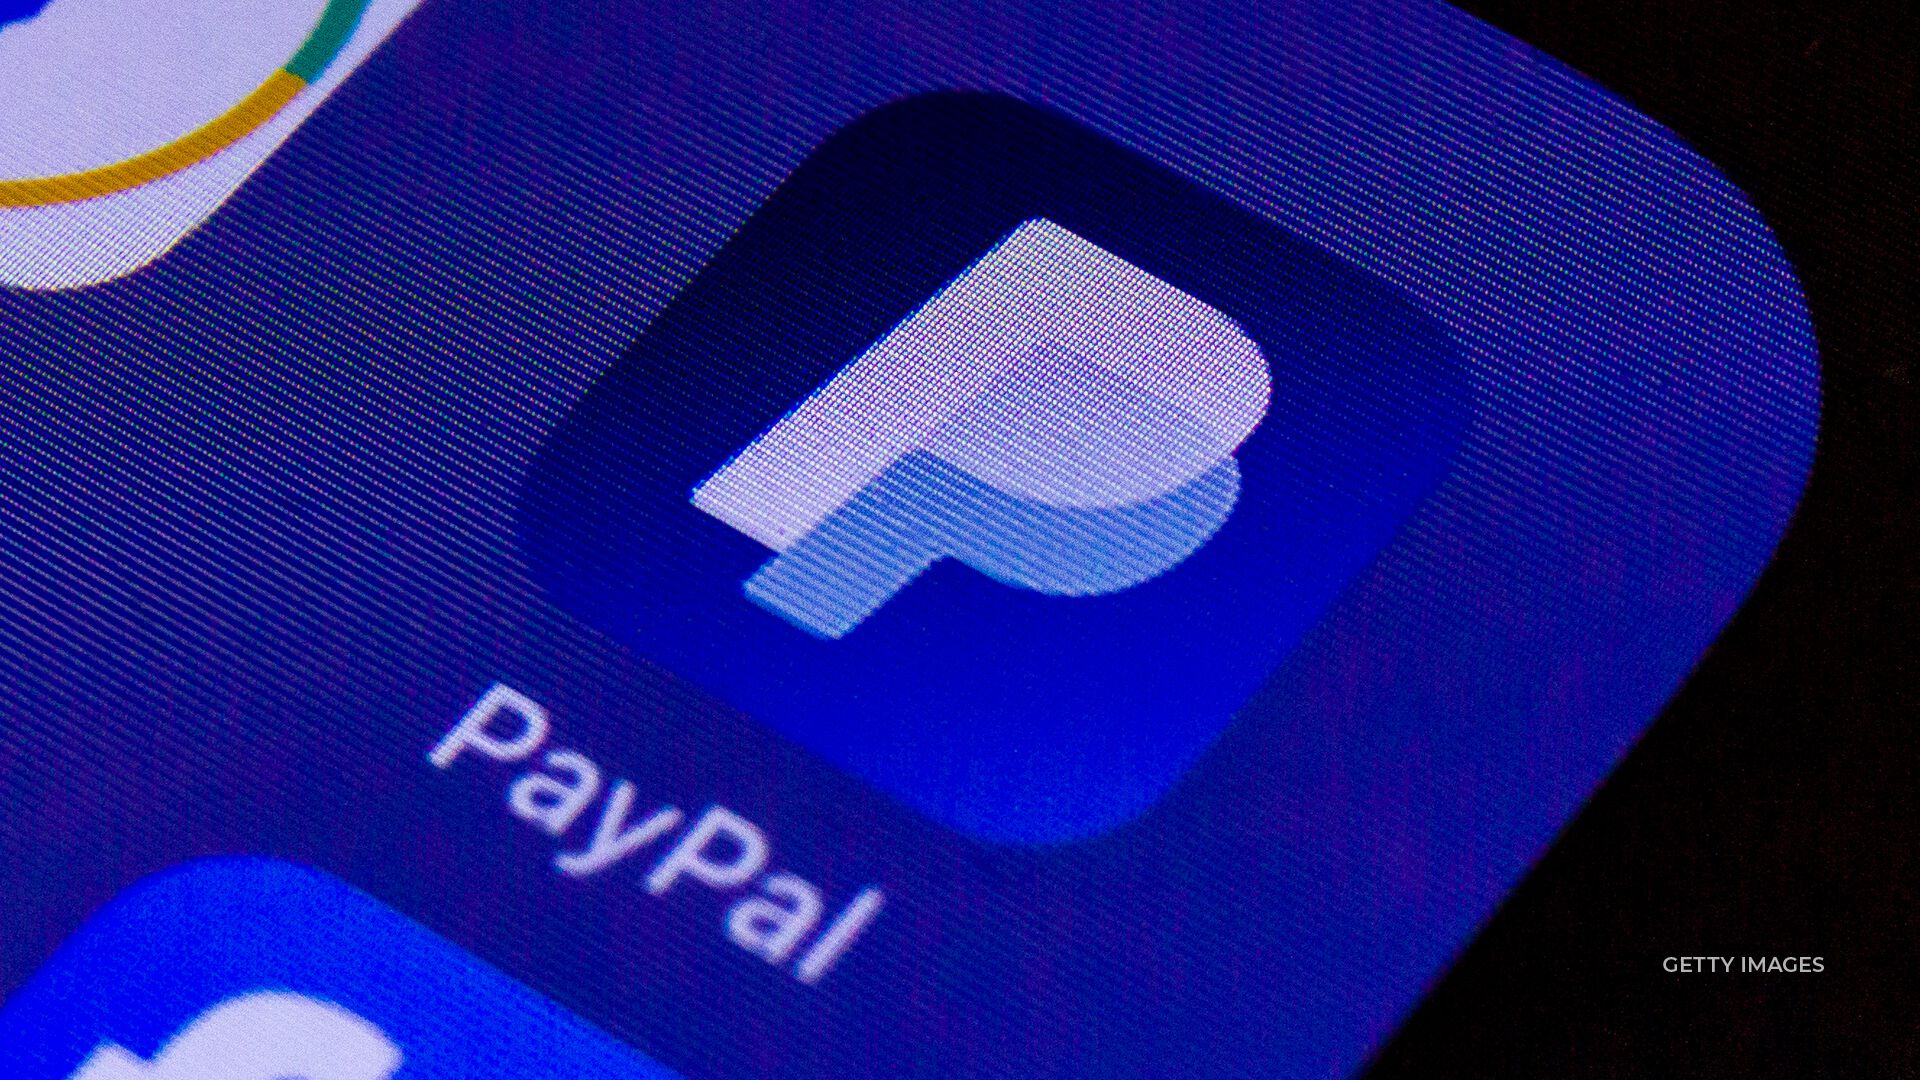 Payment service PayPal has cleared up confusion over reported plans to subject users to a ,500 fine for misinformation.